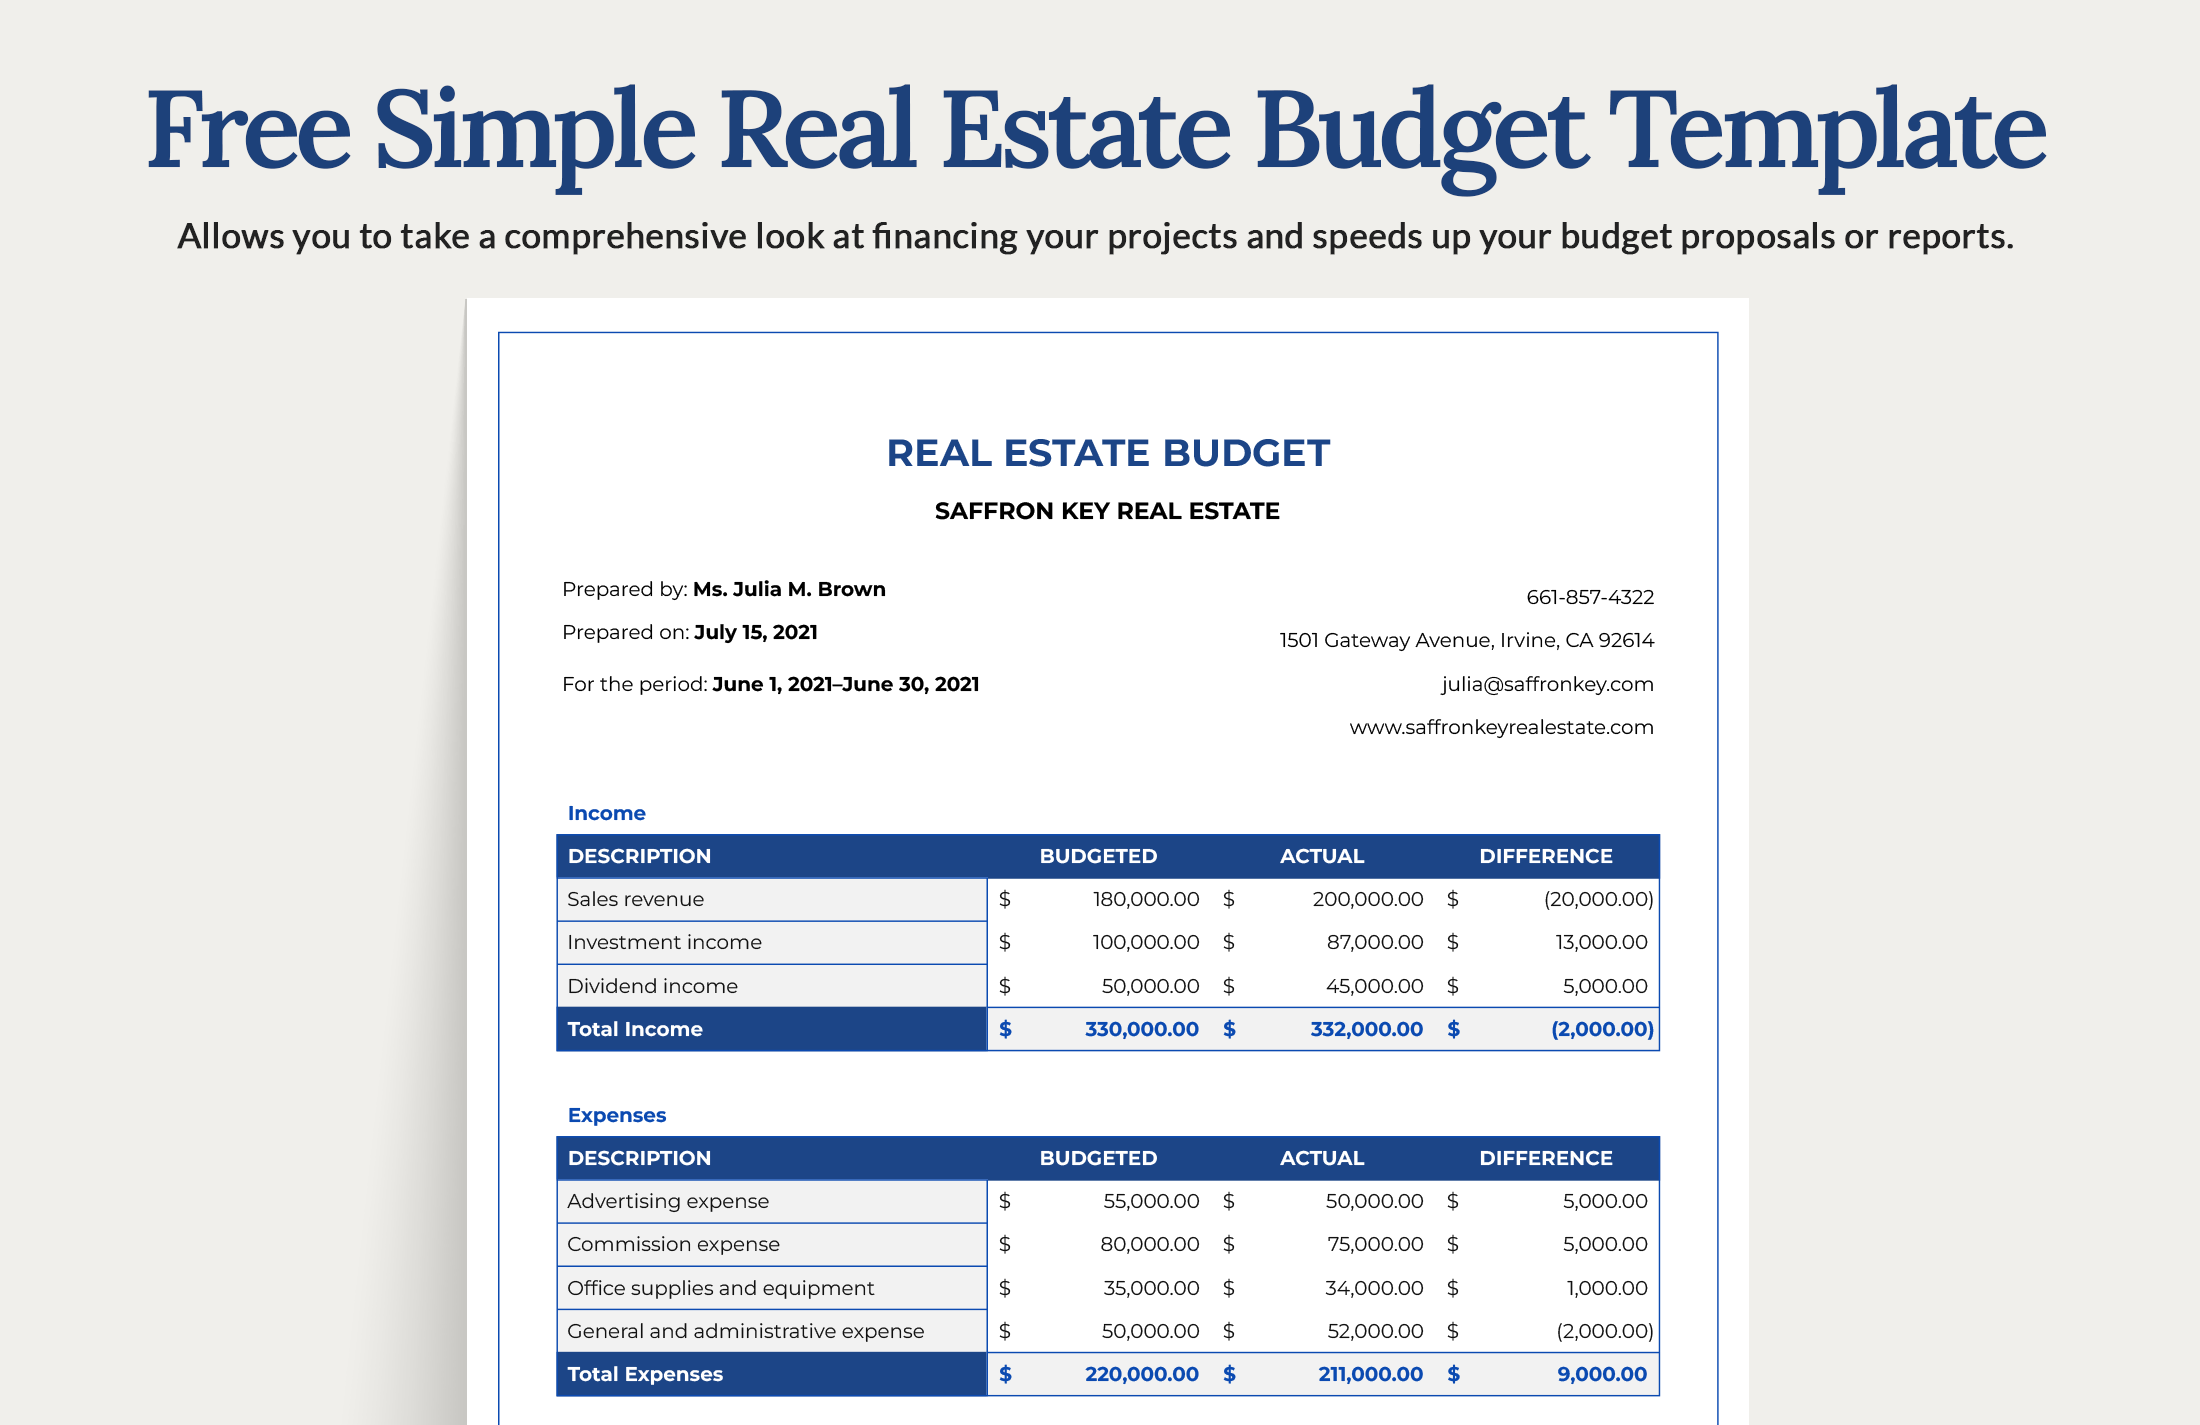 Free Simple Real Estate Budget Template Word, Google Docs, Excel